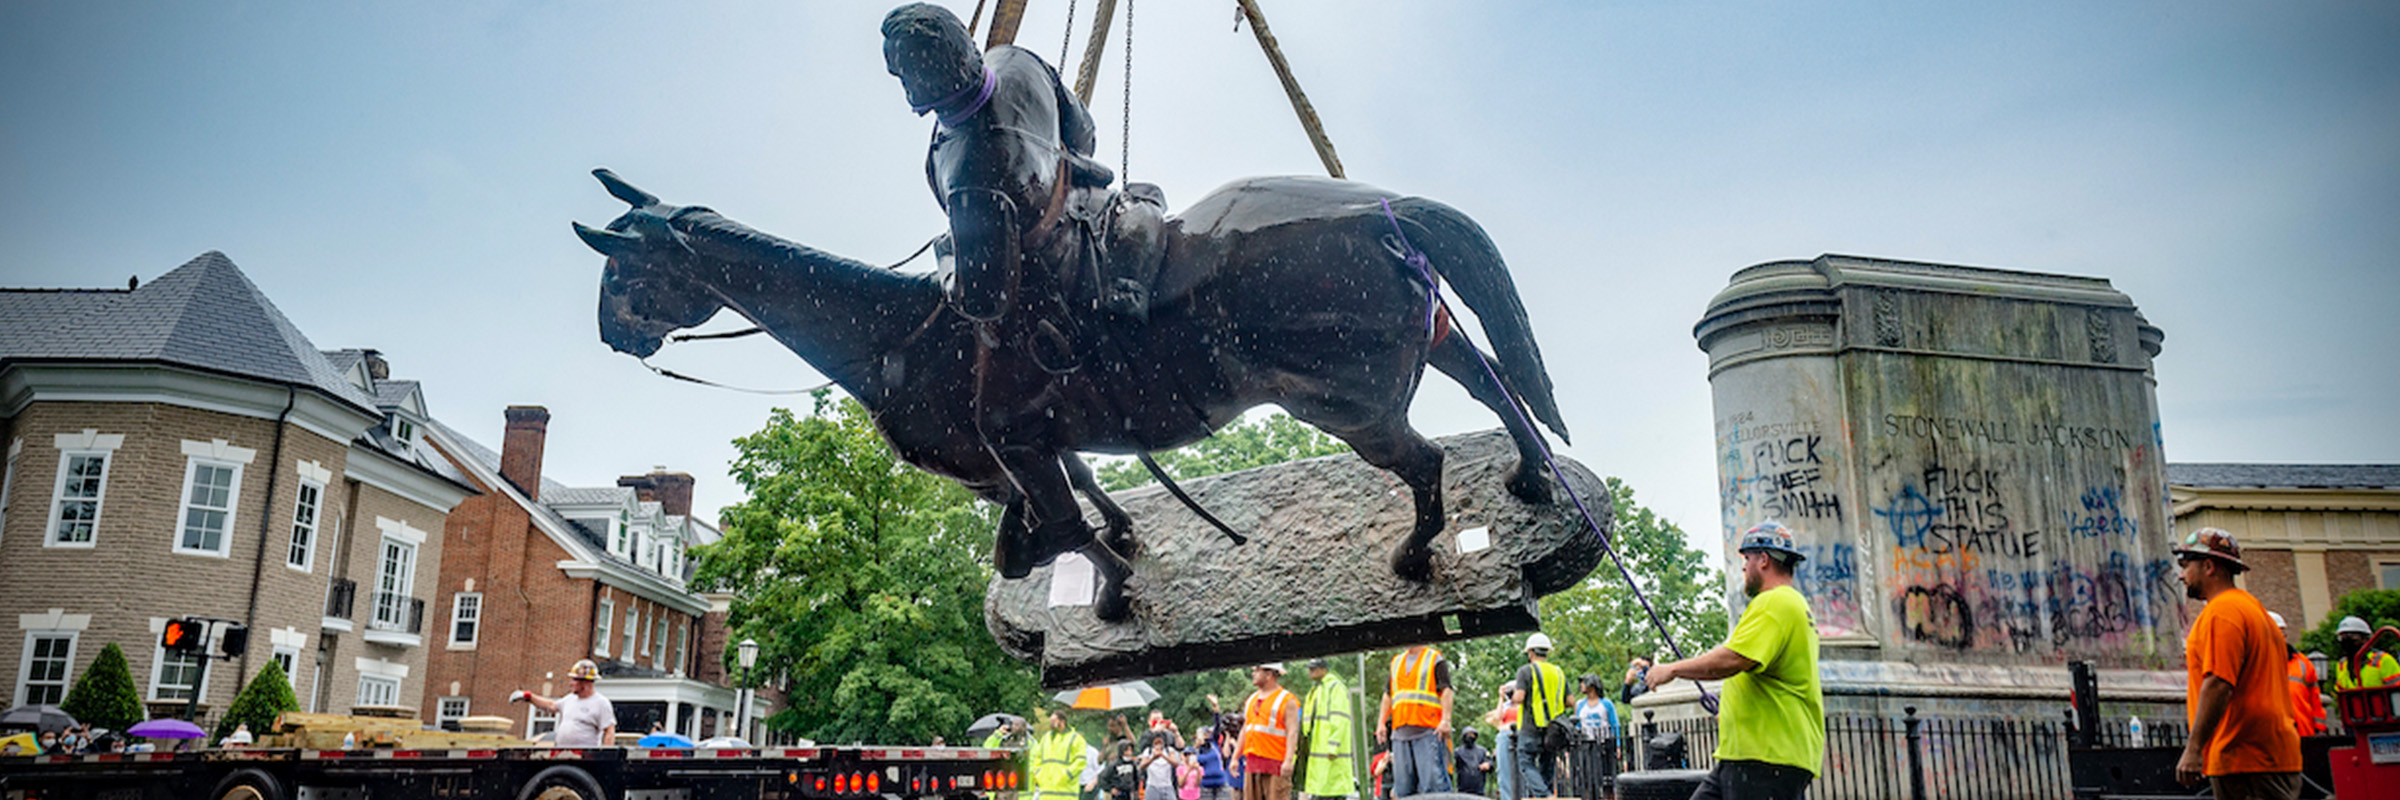 The Robert E. Lee statue being removed from Monument Ave. surrounded by construction workers with a truck.